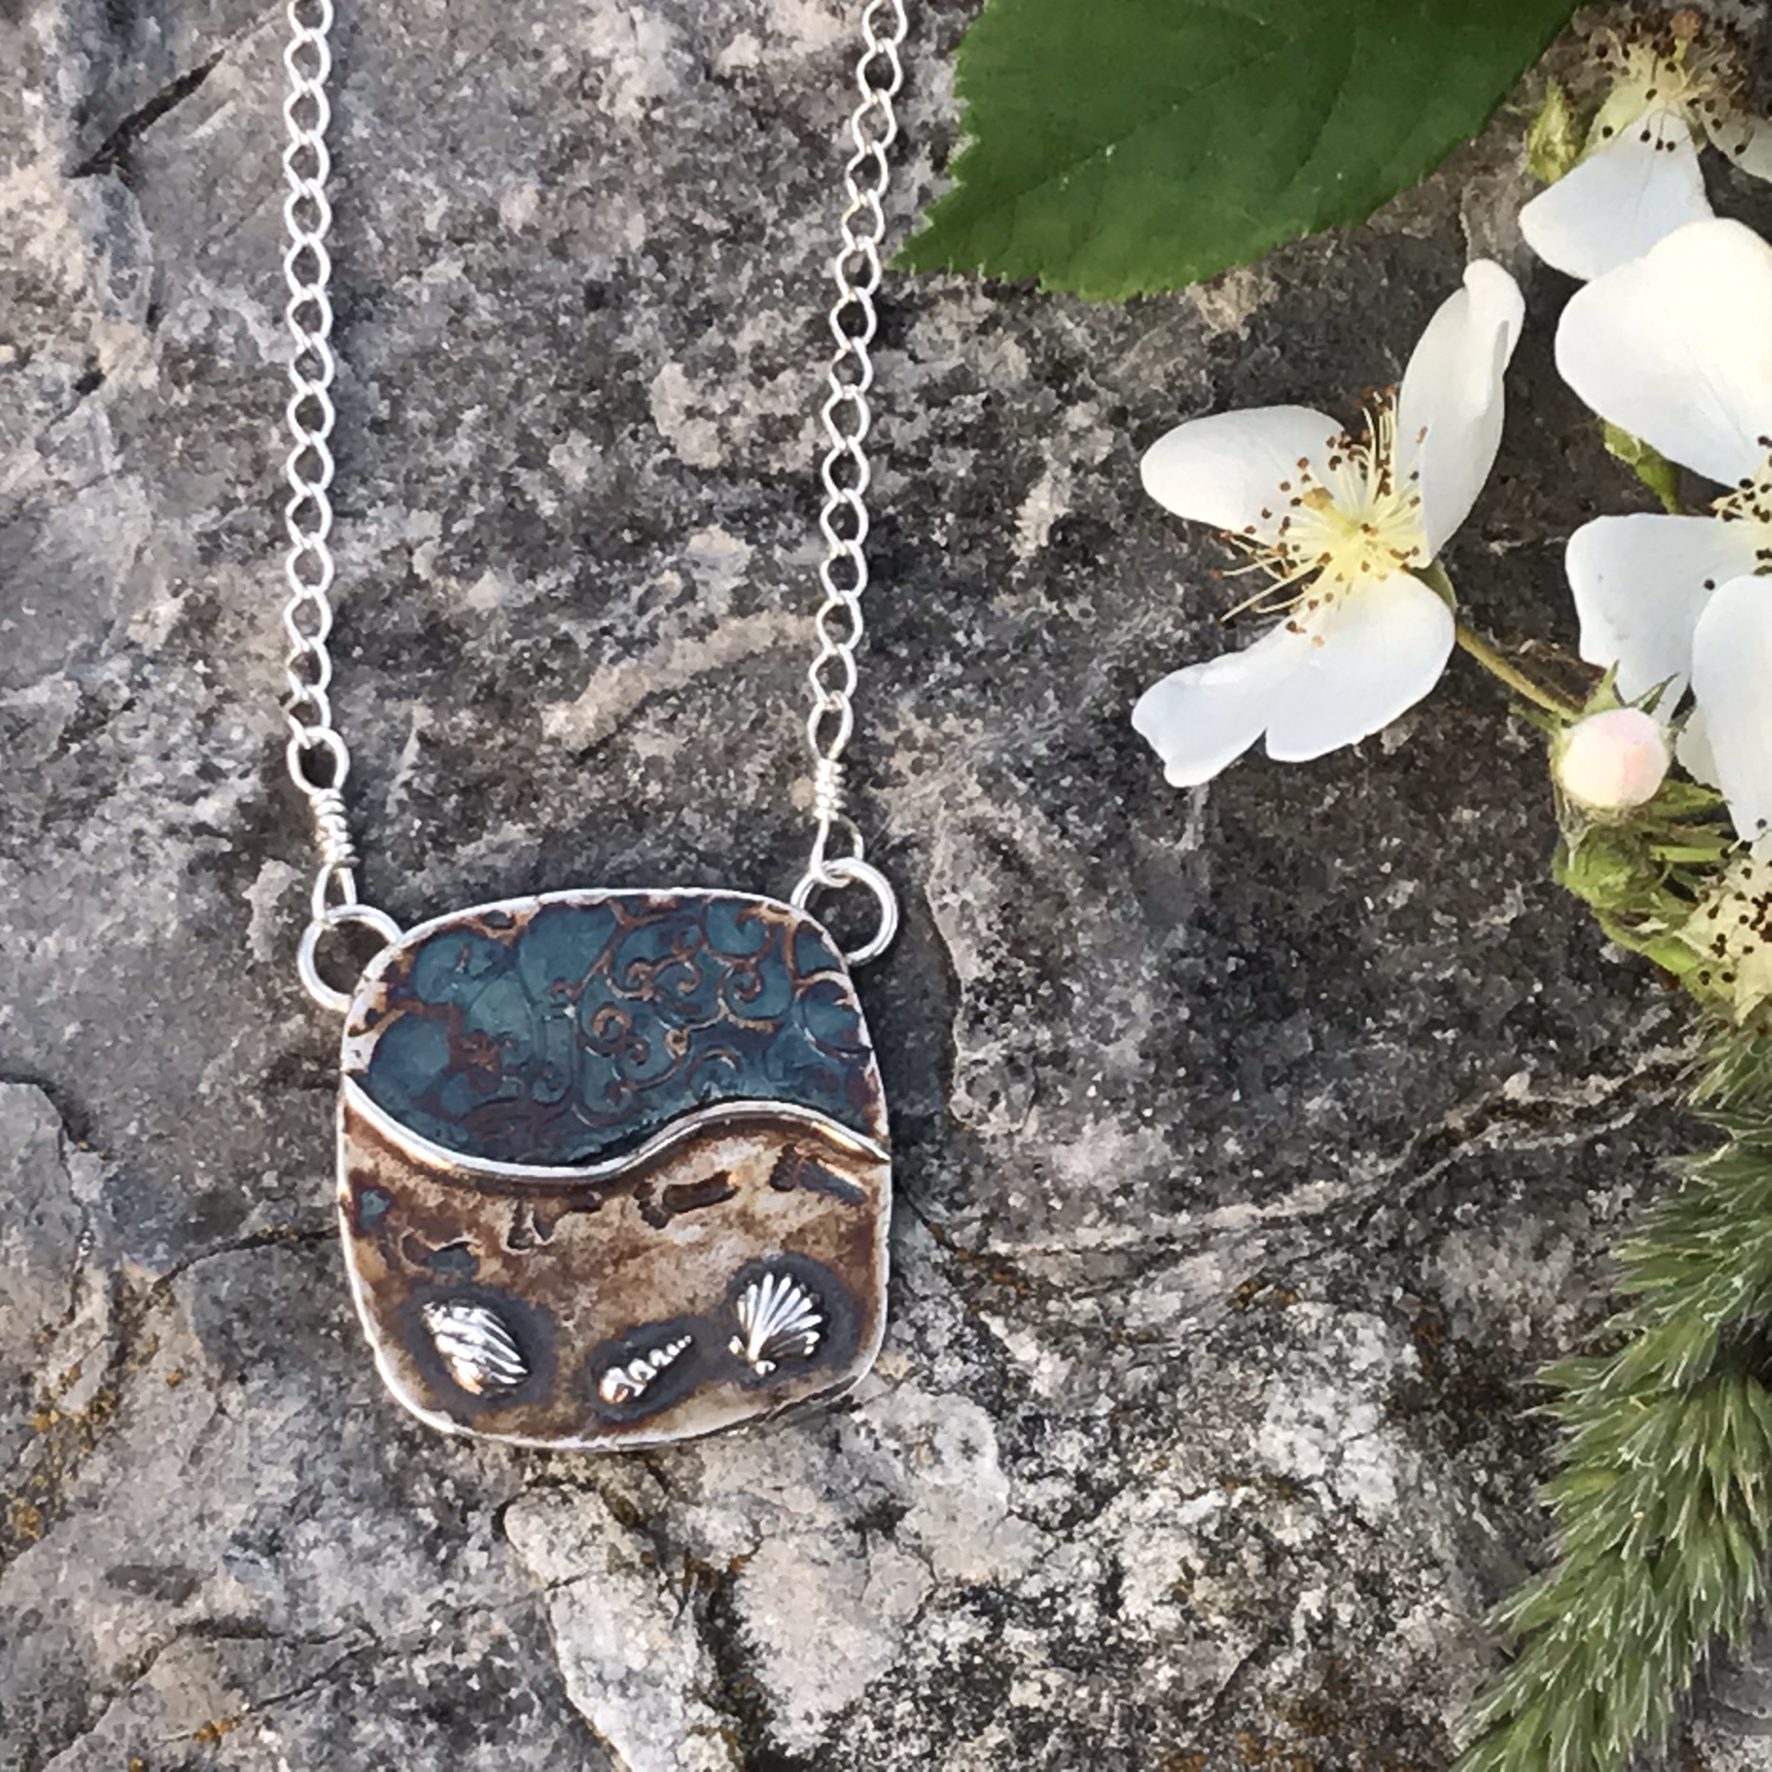 Never Alone Large Silver Cushion Pendant- 1 and 1/8 inch rounded square pendant created in fine silver metal clay and showing images of sand, waves and shells and imprinted with footprints with 18 inch sterling silver chain laying on rock